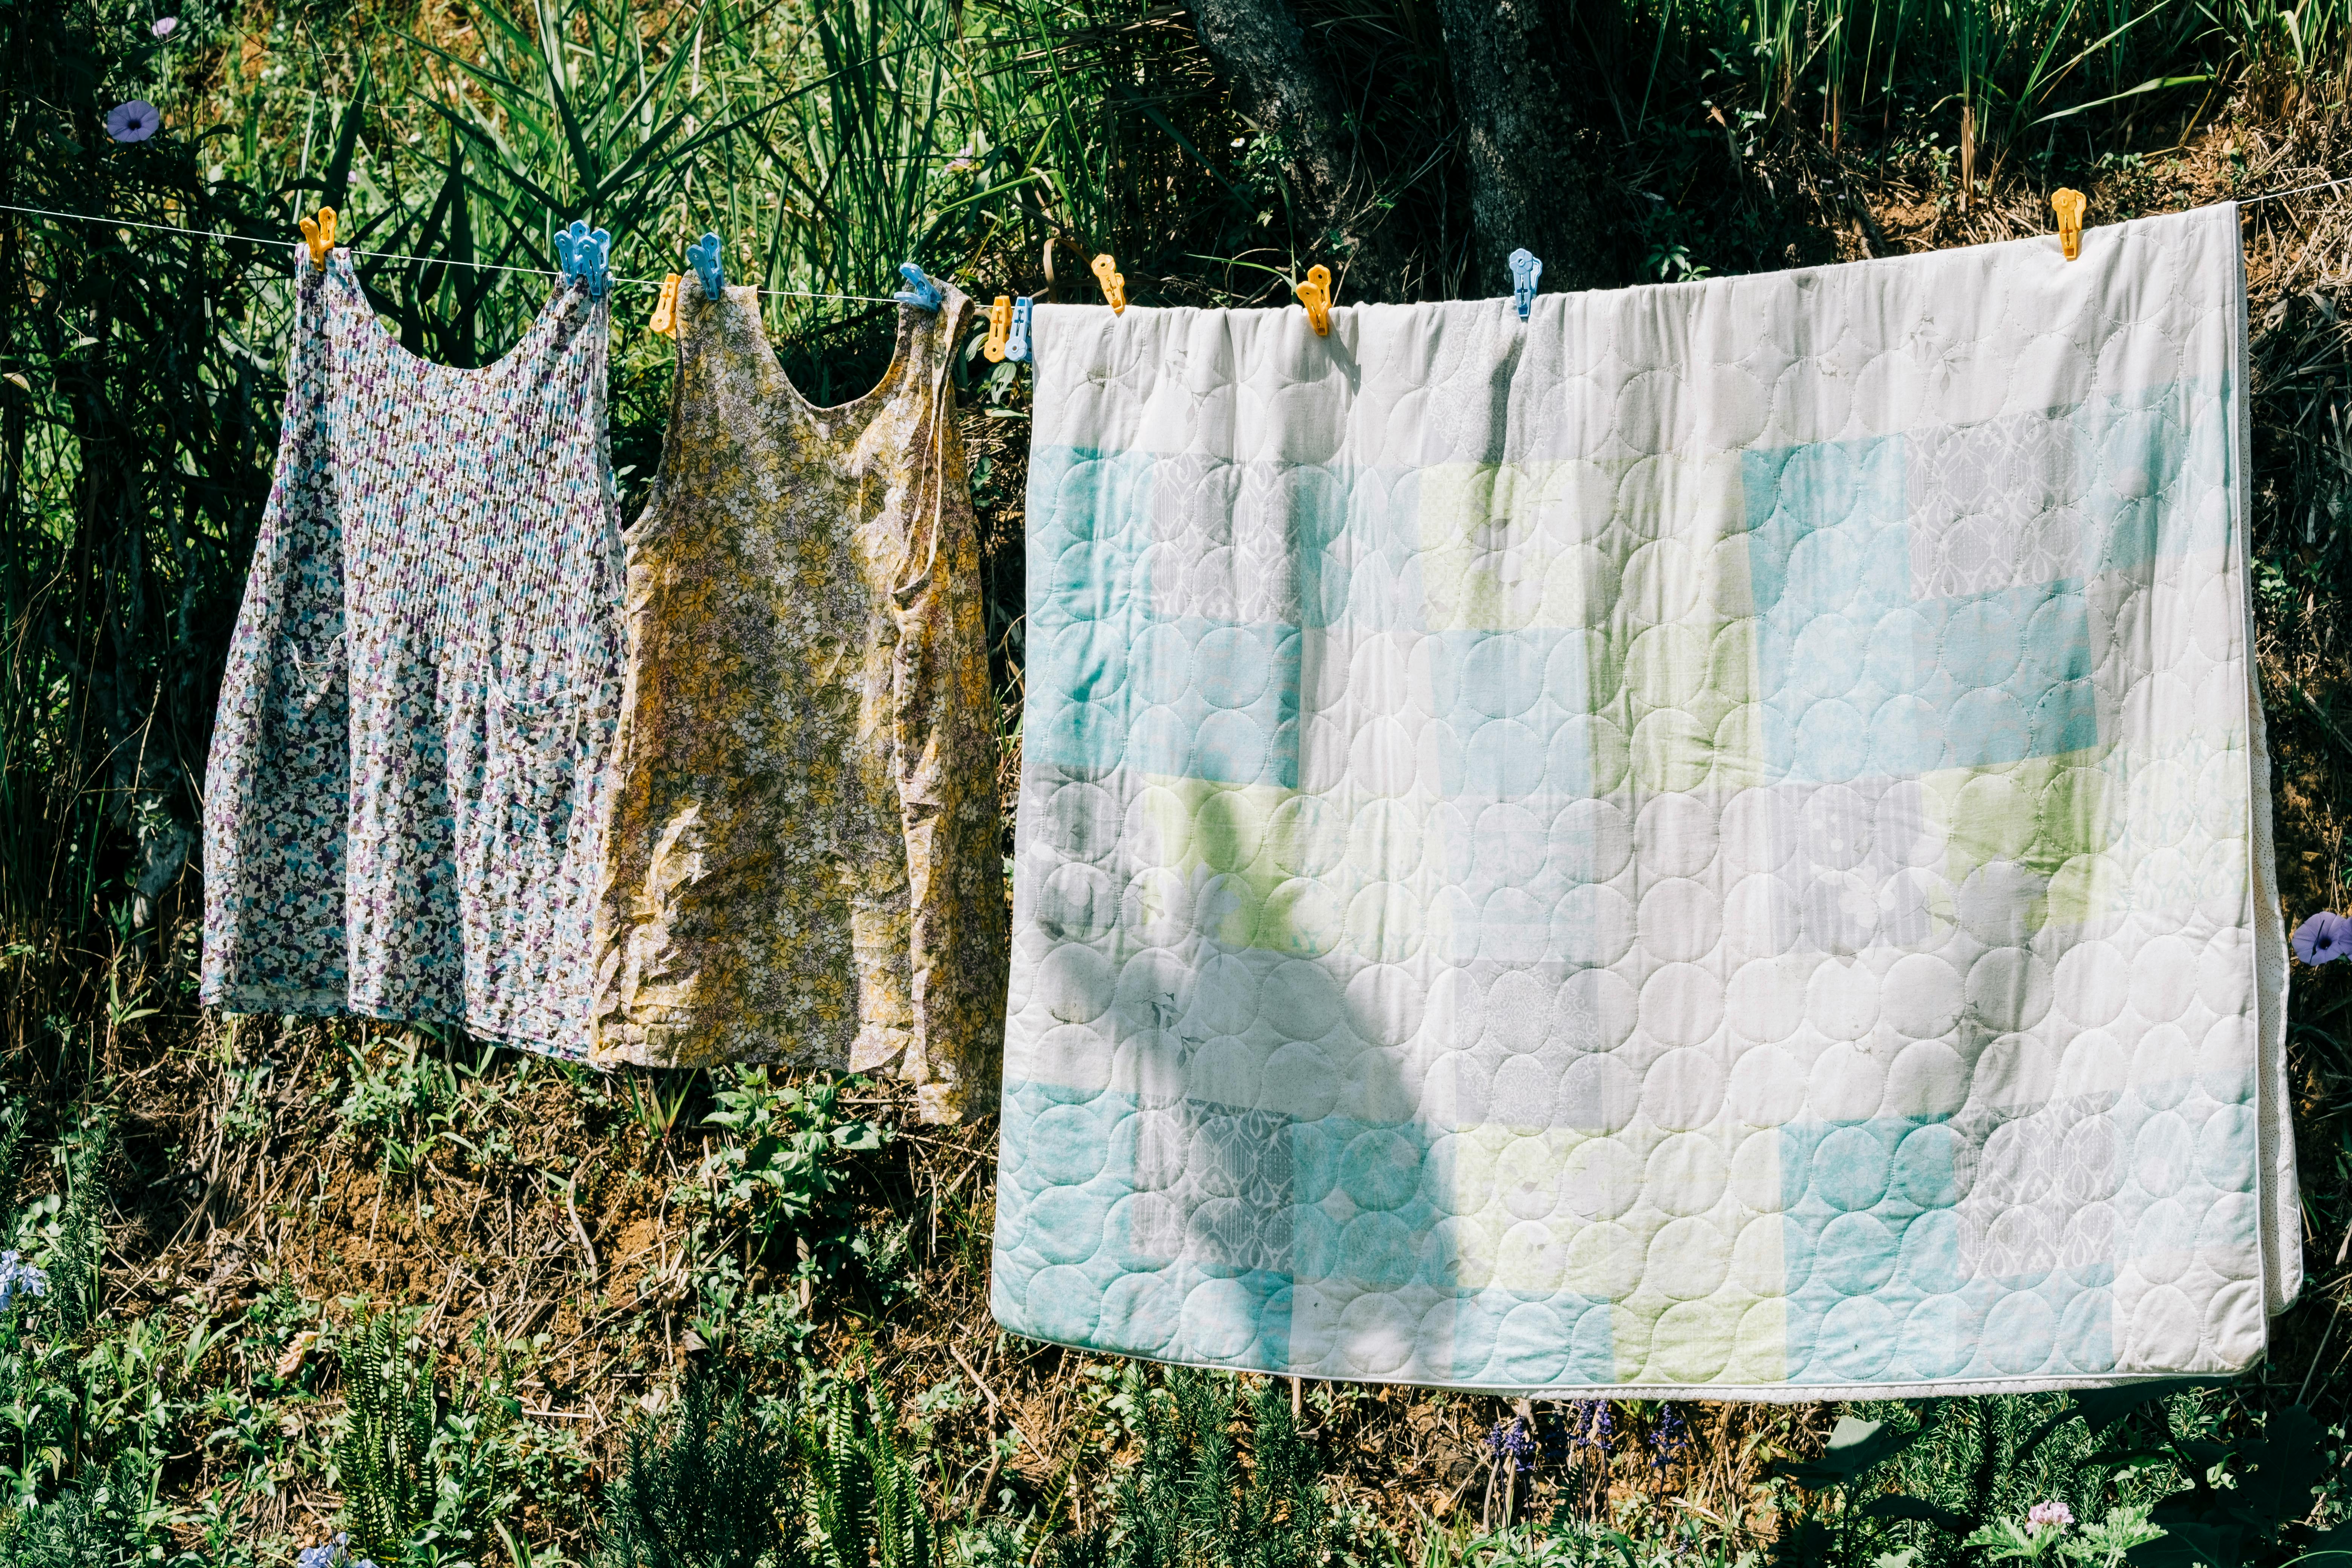 Laundry Air Drying on String · Free Stock Photo